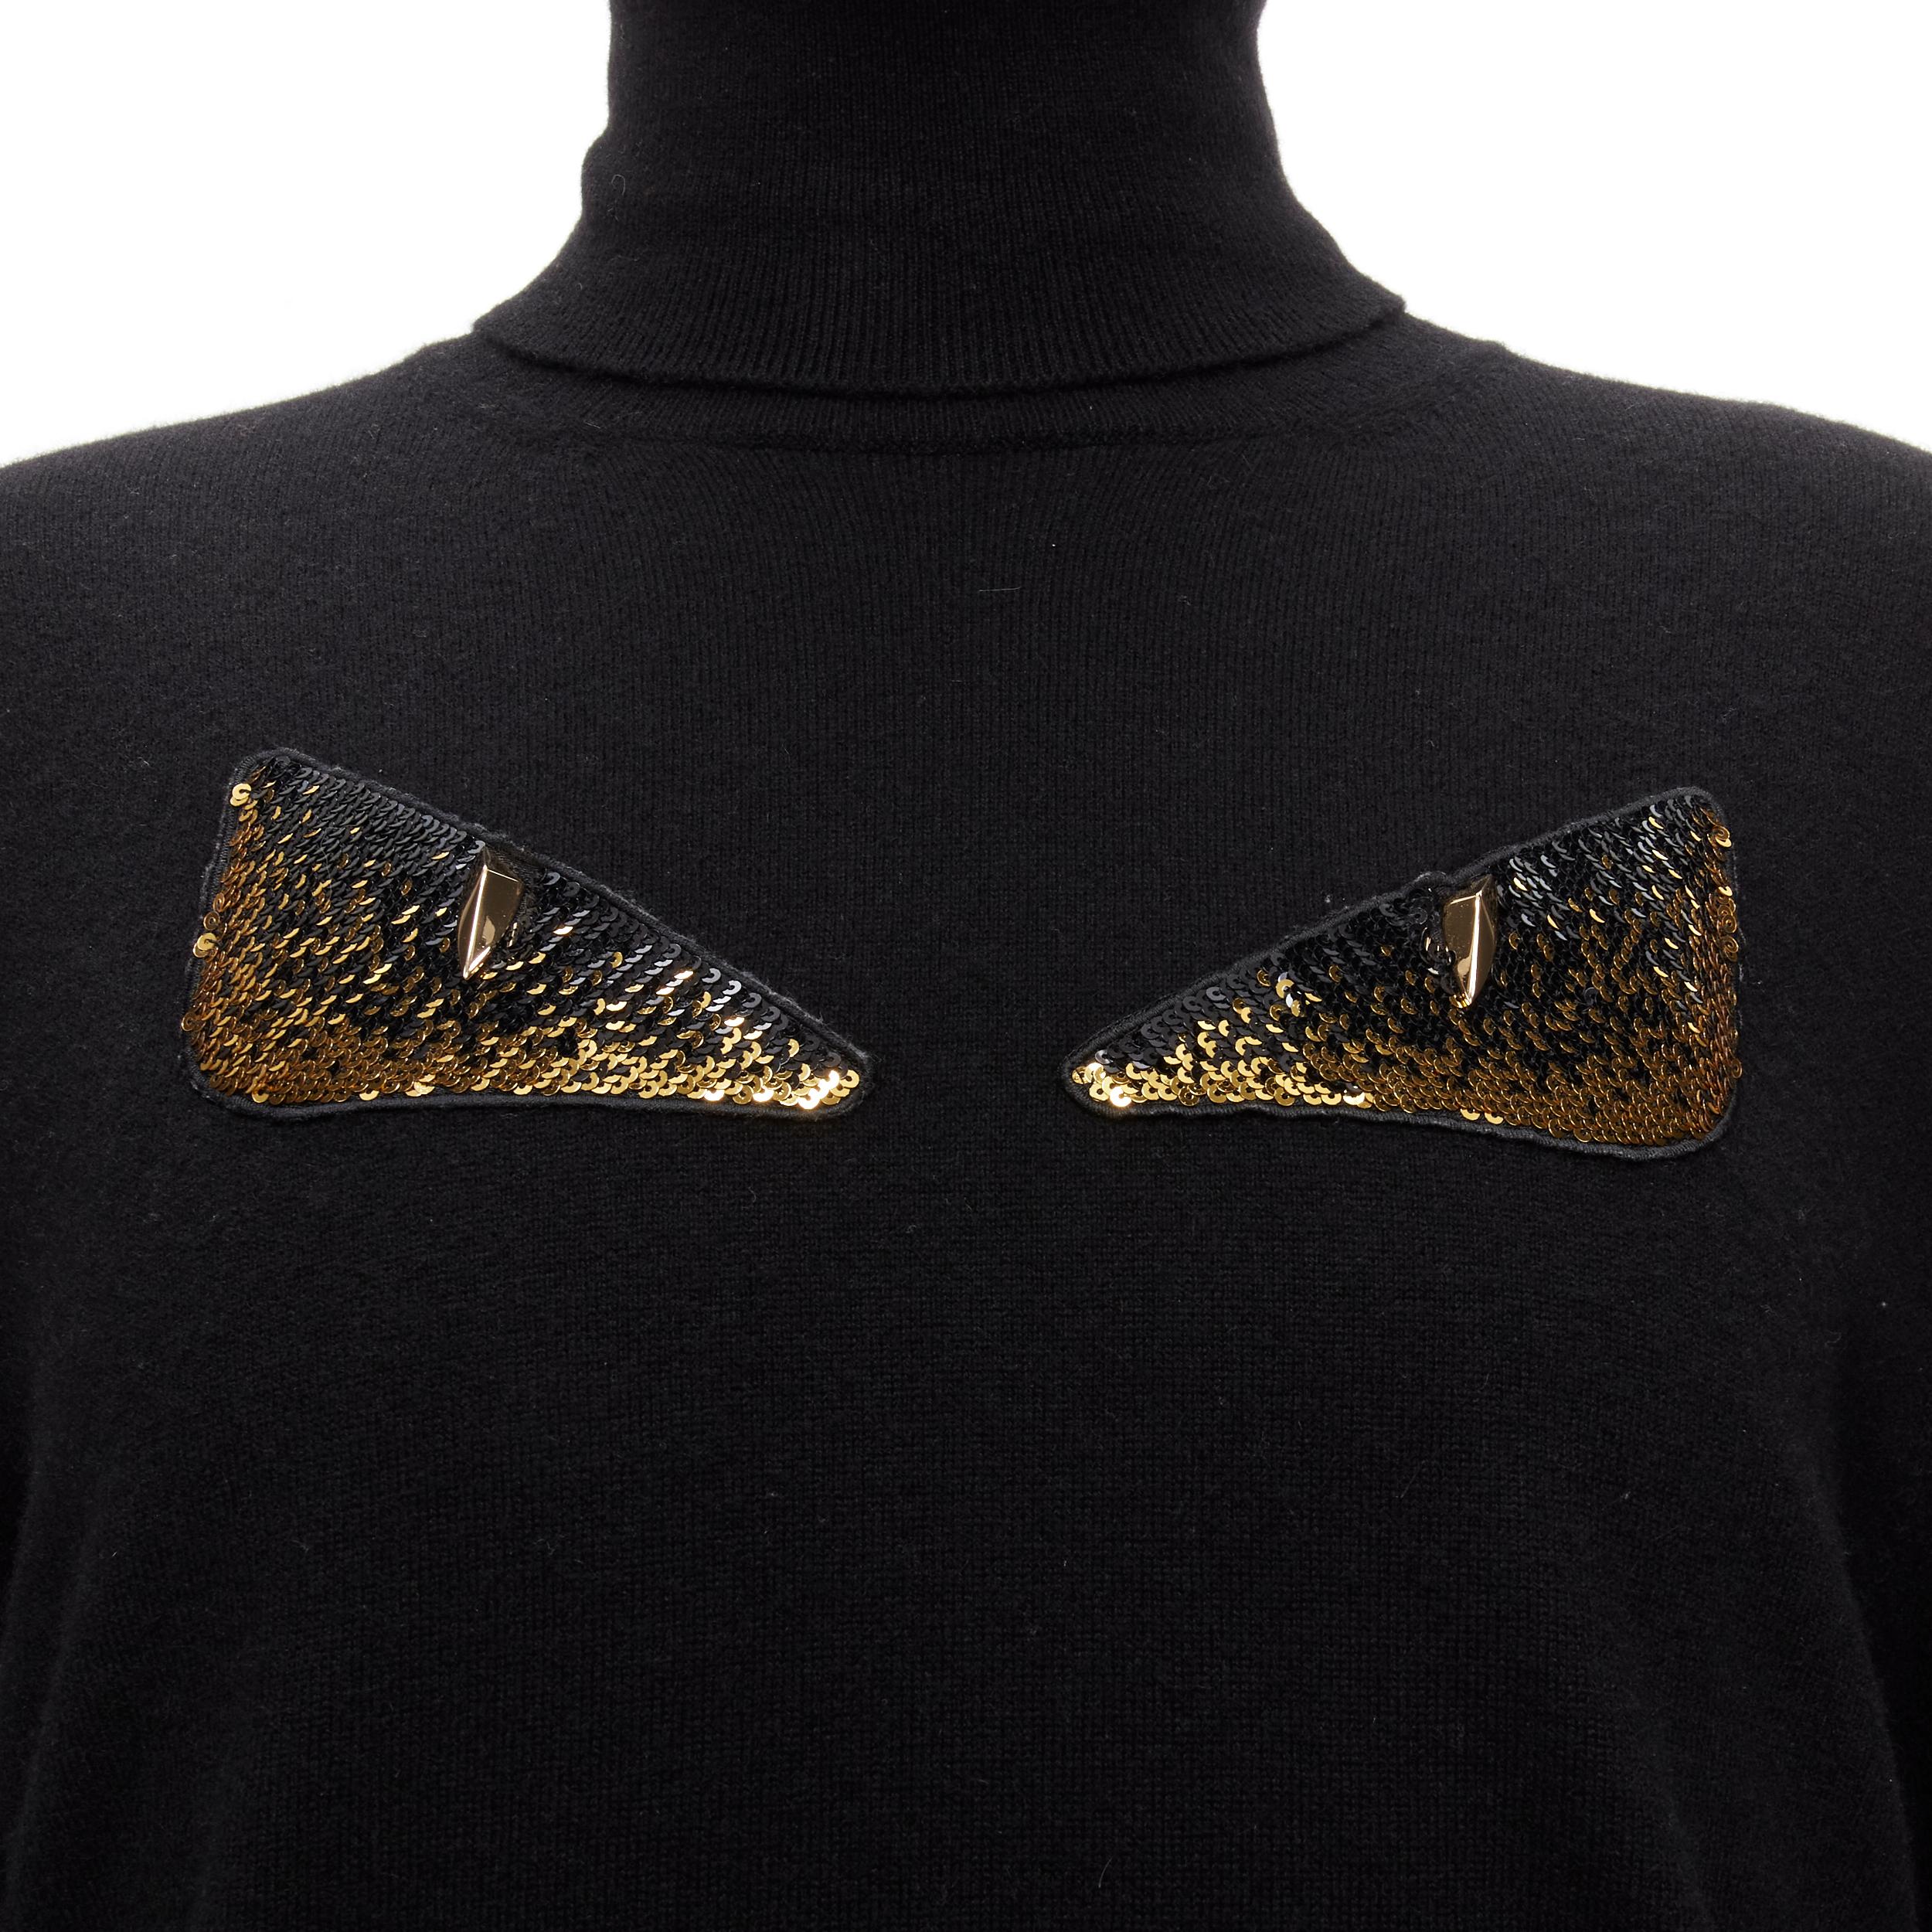 FENDI 100% cashmere black beaded stud Monster eyes turtleneck sweater IT50 L
Reference: TGAS/D00148
Brand: Fendi
Model: Monster
Material: Cashmere
Color: Black, Gold
Pattern: Solid
Closure: Pullover
Made in: Italy

CONDITION:
Condition: Excellent,